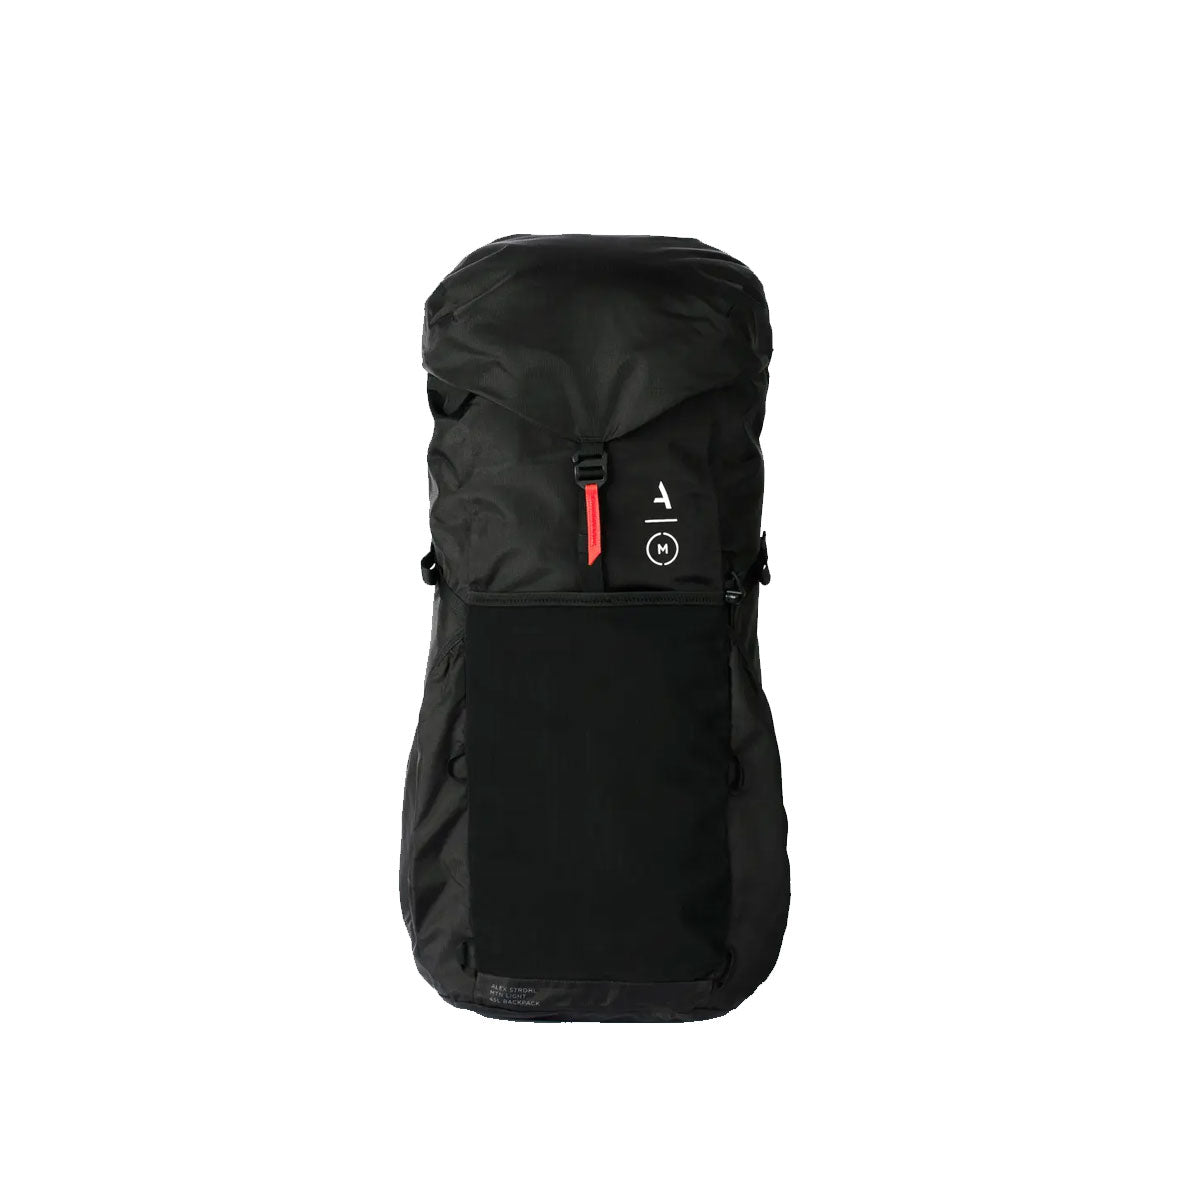 Moment : Strohl Mountain Light 45L Backpack : Black